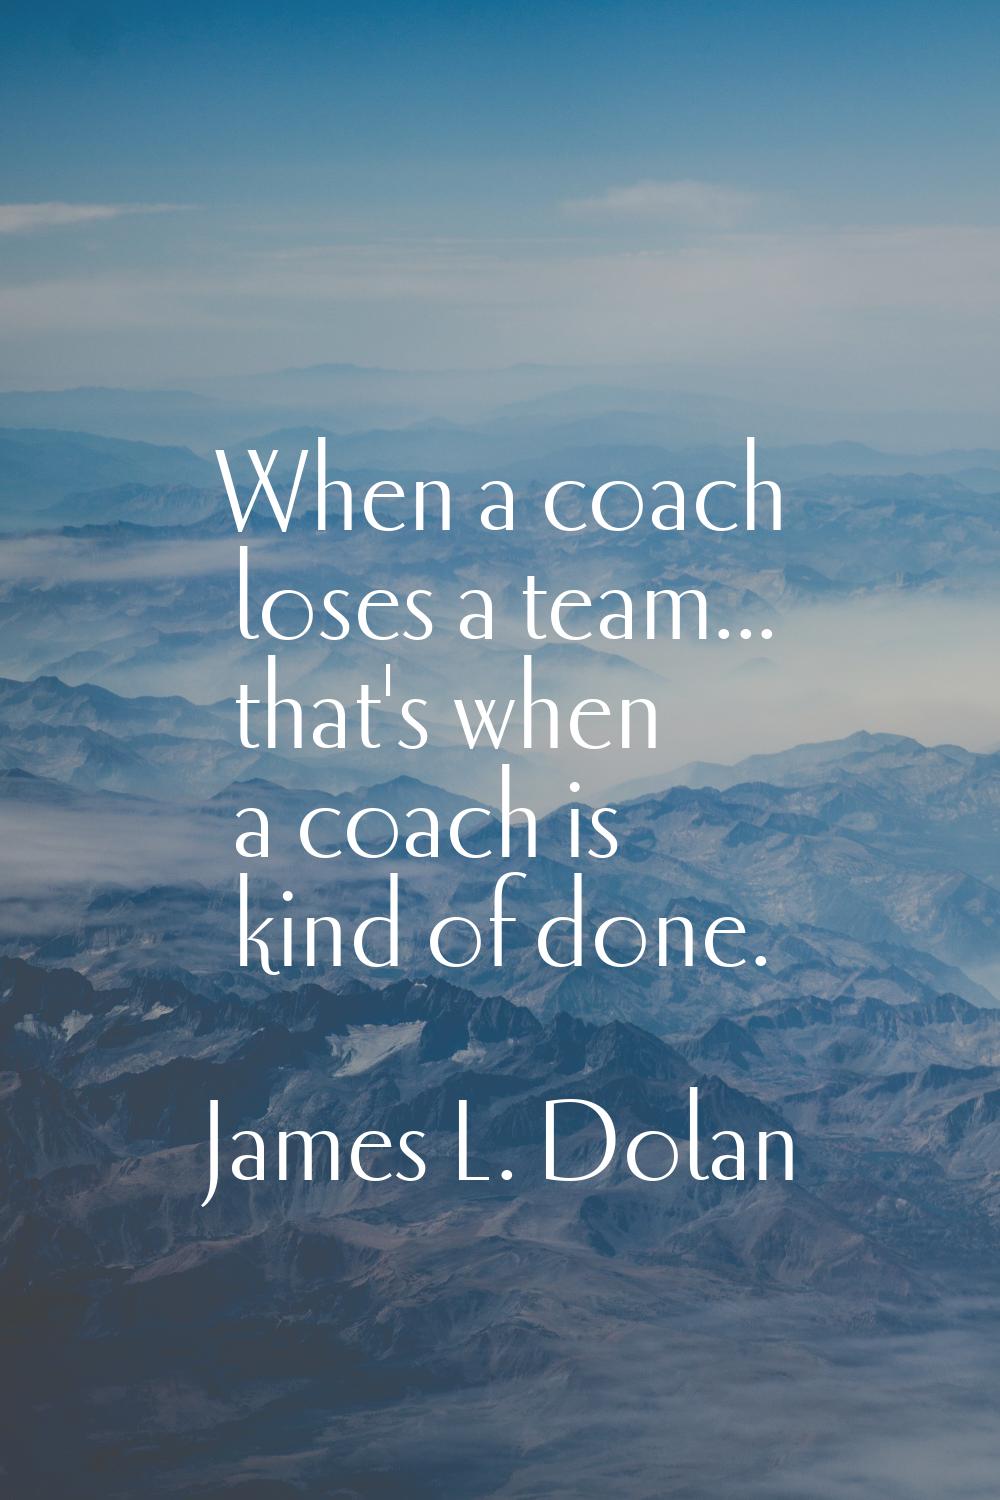 When a coach loses a team... that's when a coach is kind of done.